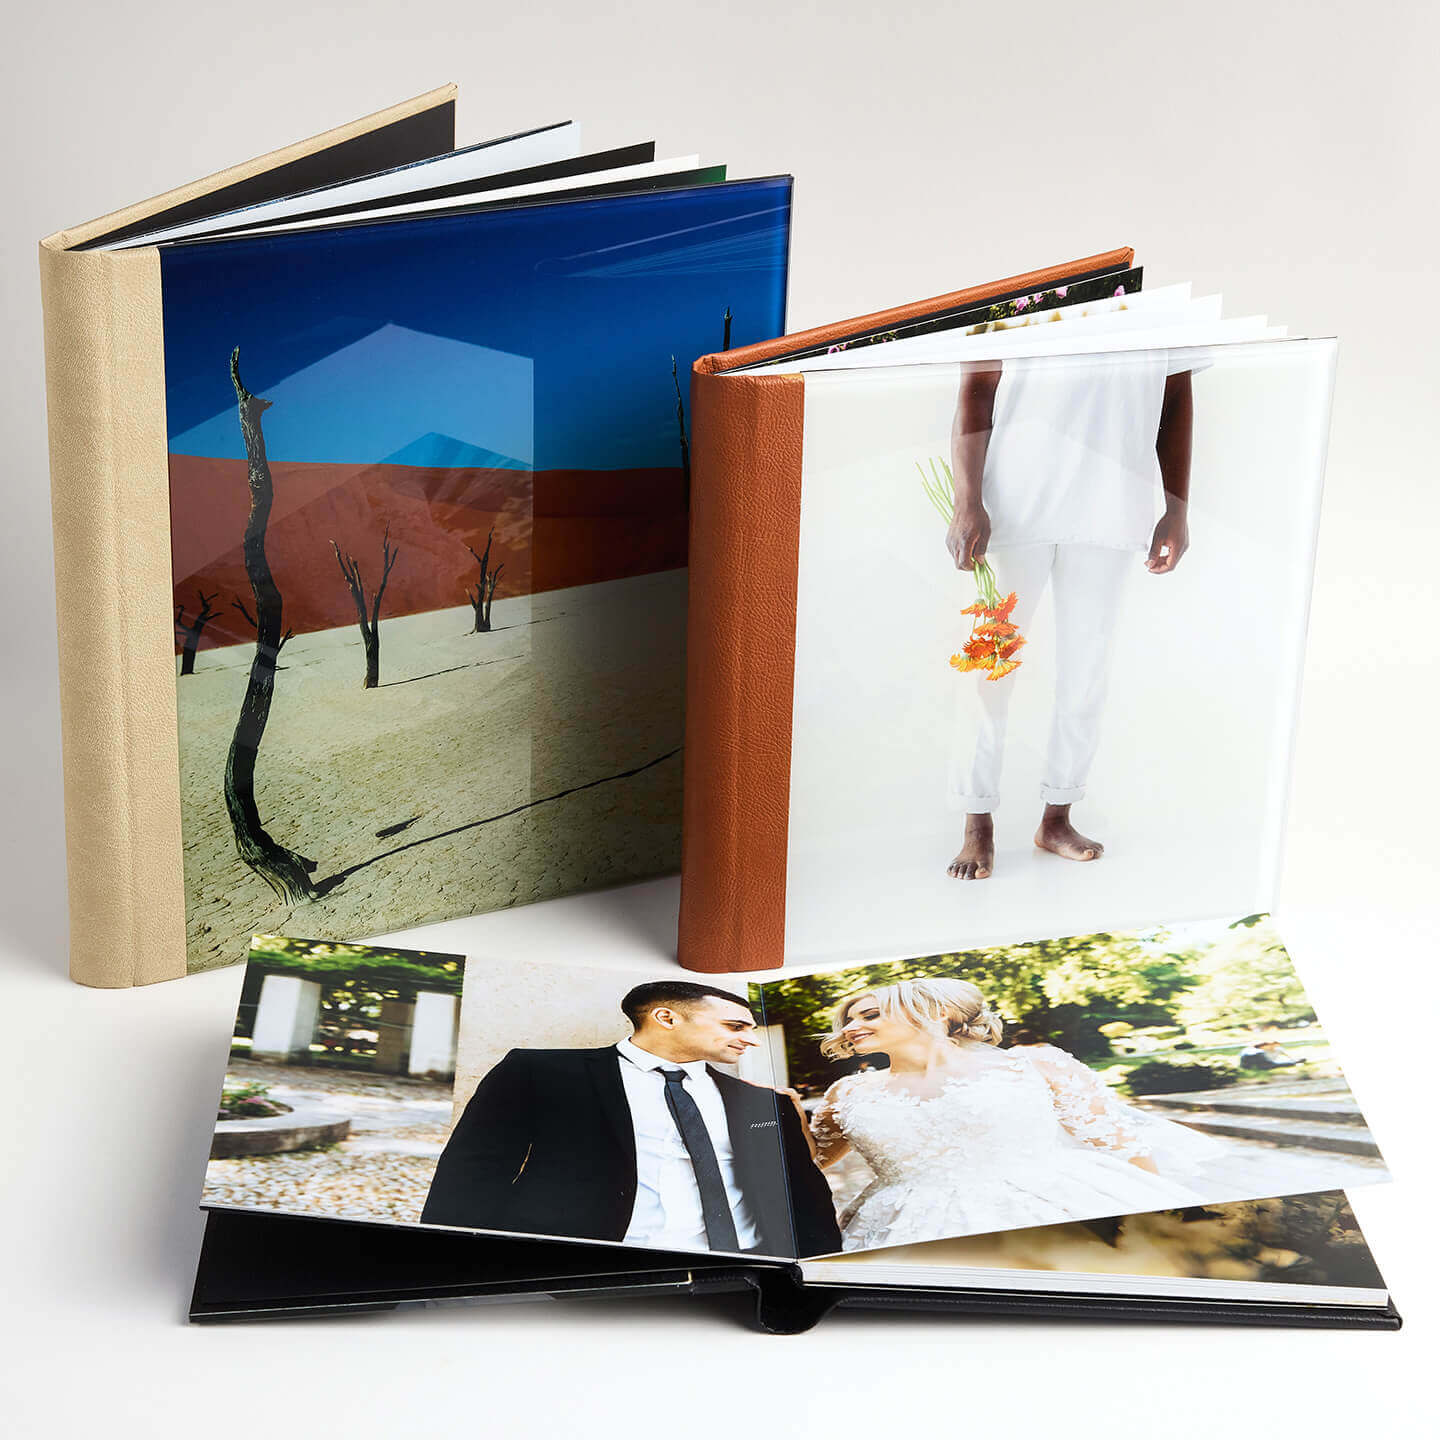 Introducing: The Acrylic Cover Photo Album